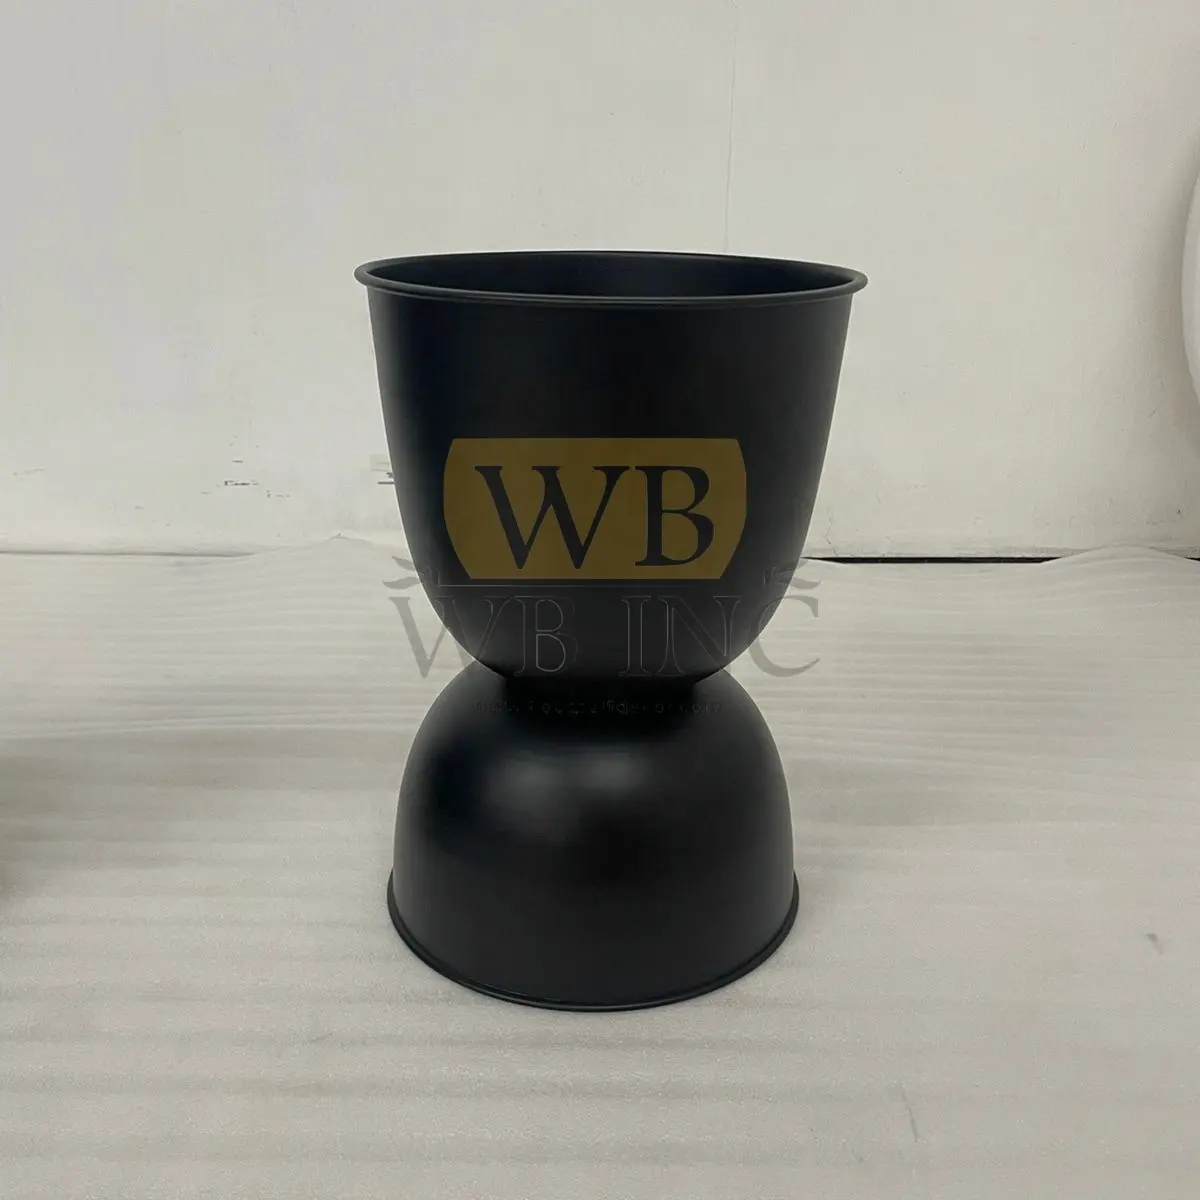 Modern Small Dome Metallic Planter Flower Pots & Planters for Home Garden Decor By WB INC INDIA